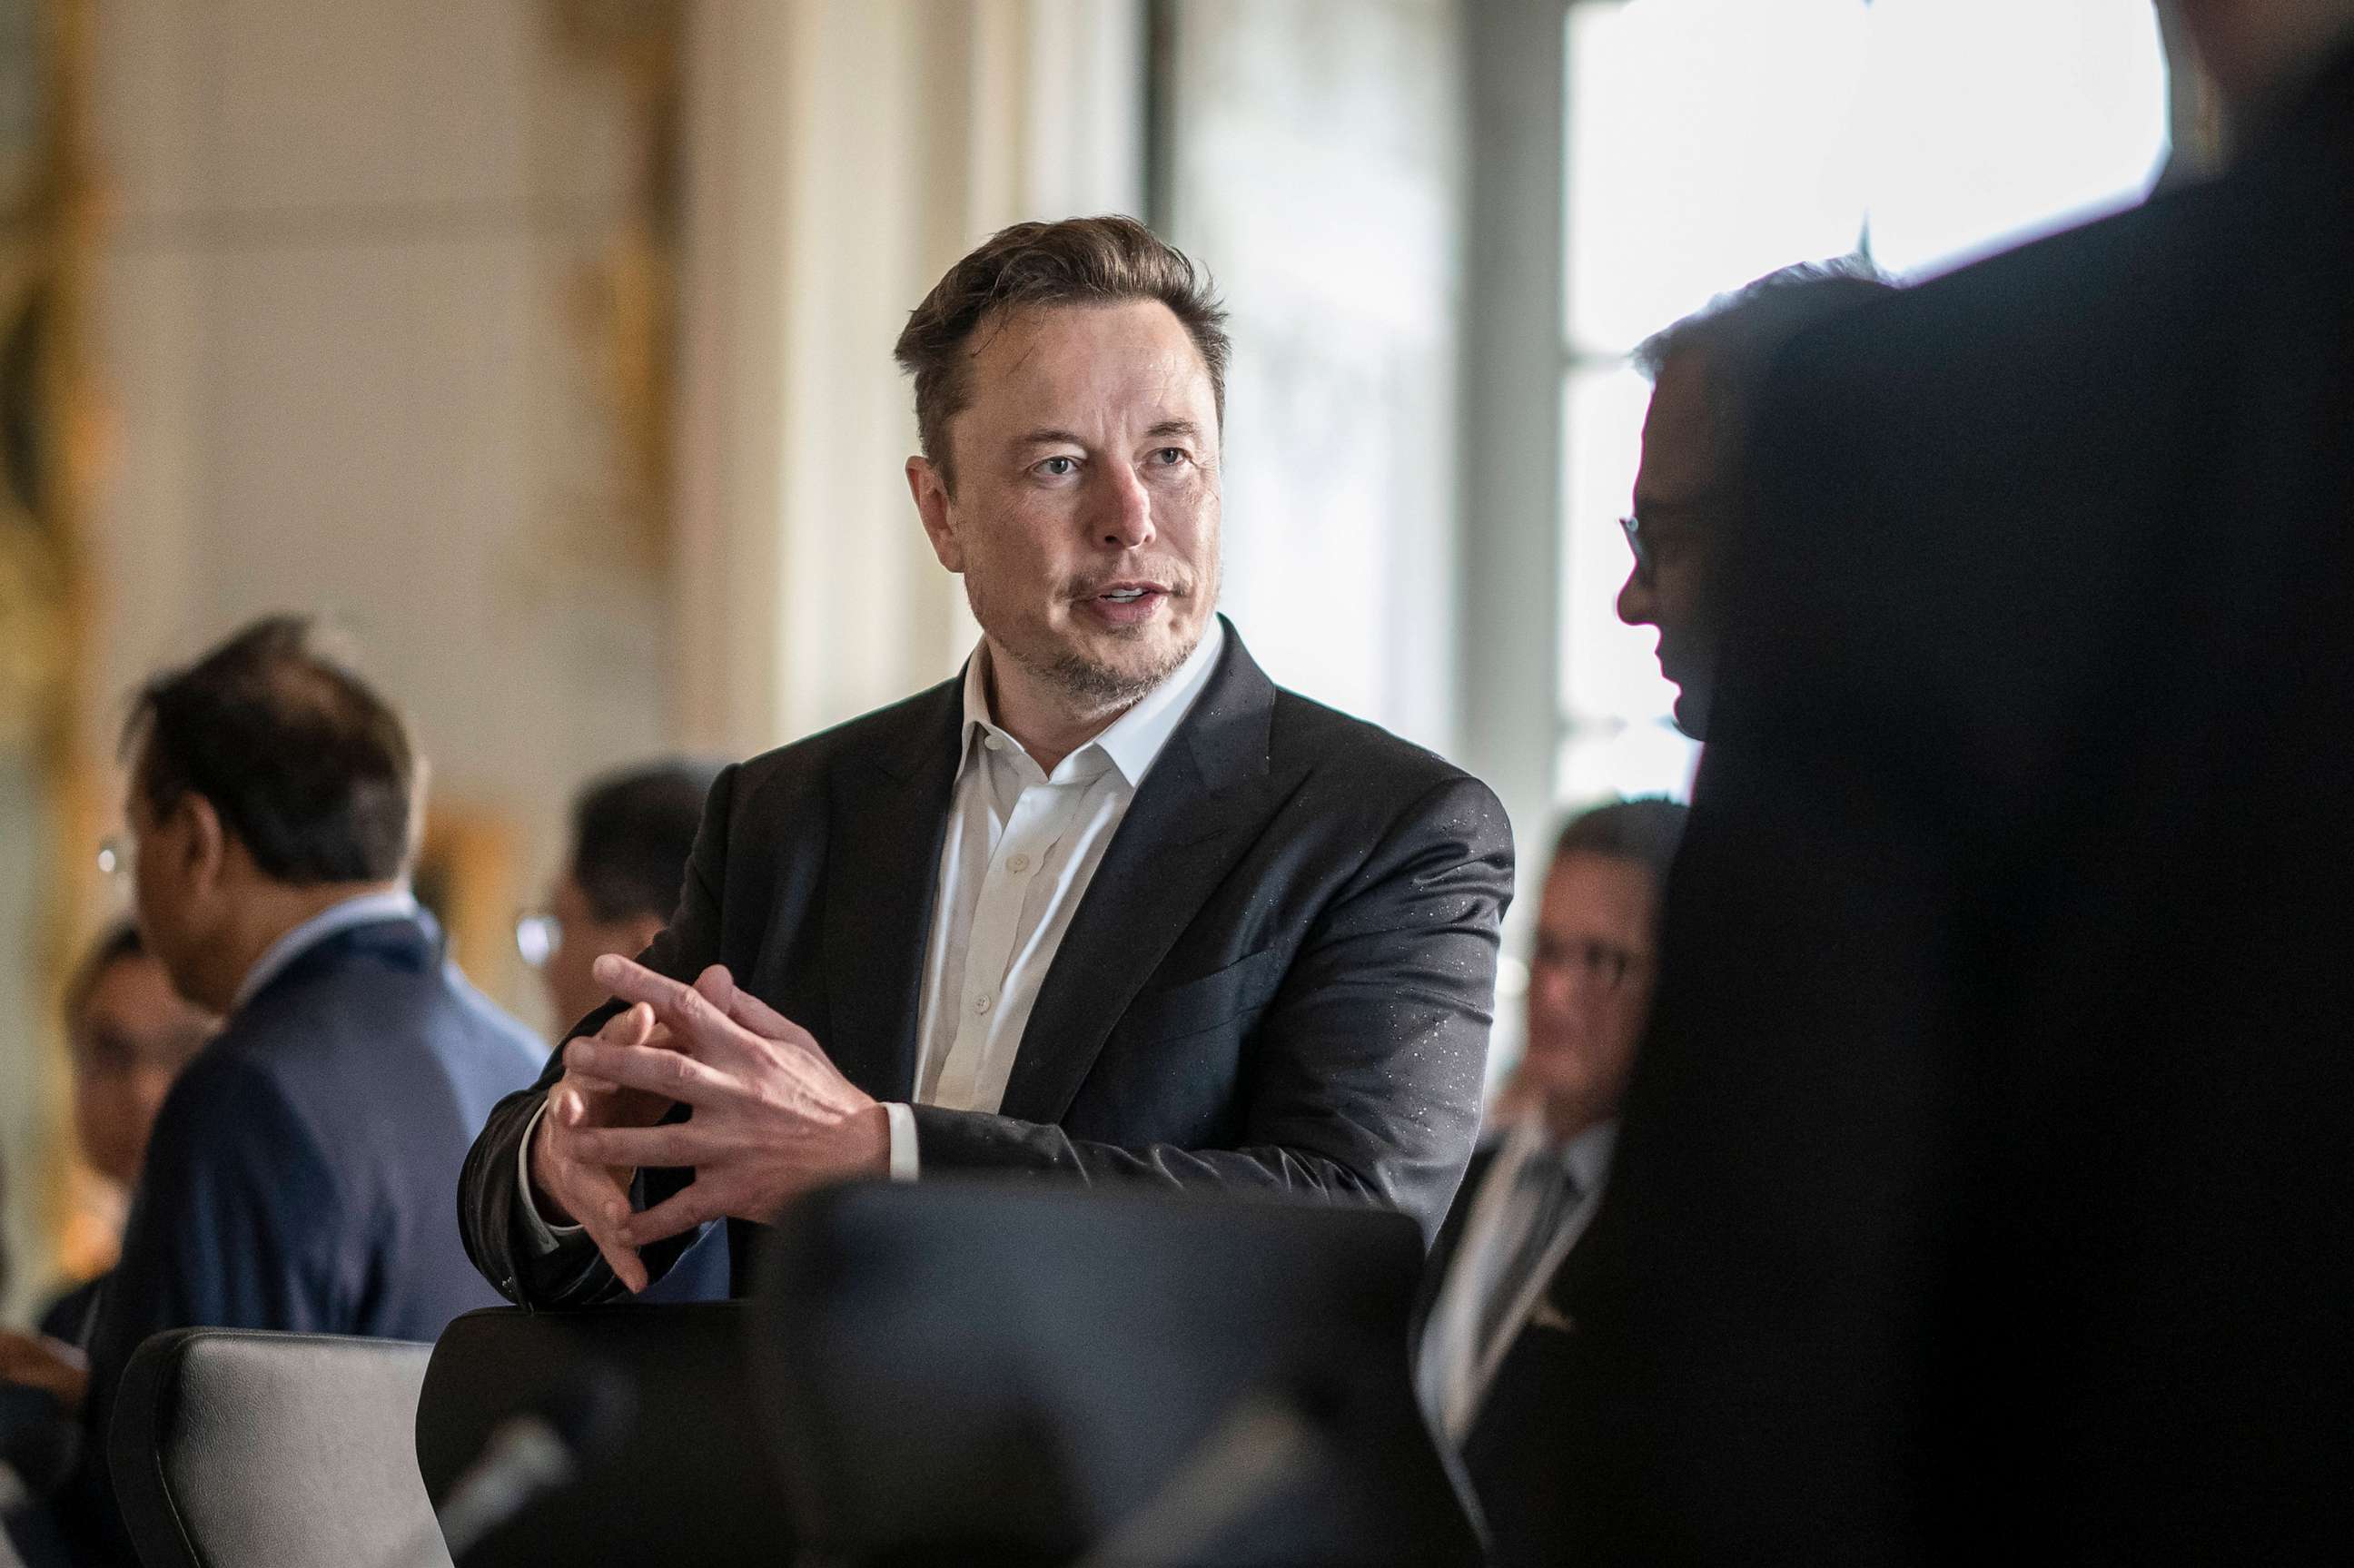 PHOTO: SpaceX, Twitter and electric car maker Tesla CEO Elon Musk at the 6th edition of the "Choose France" Summit at the Chateau de Versailles, outside Paris on May 15, 2023.